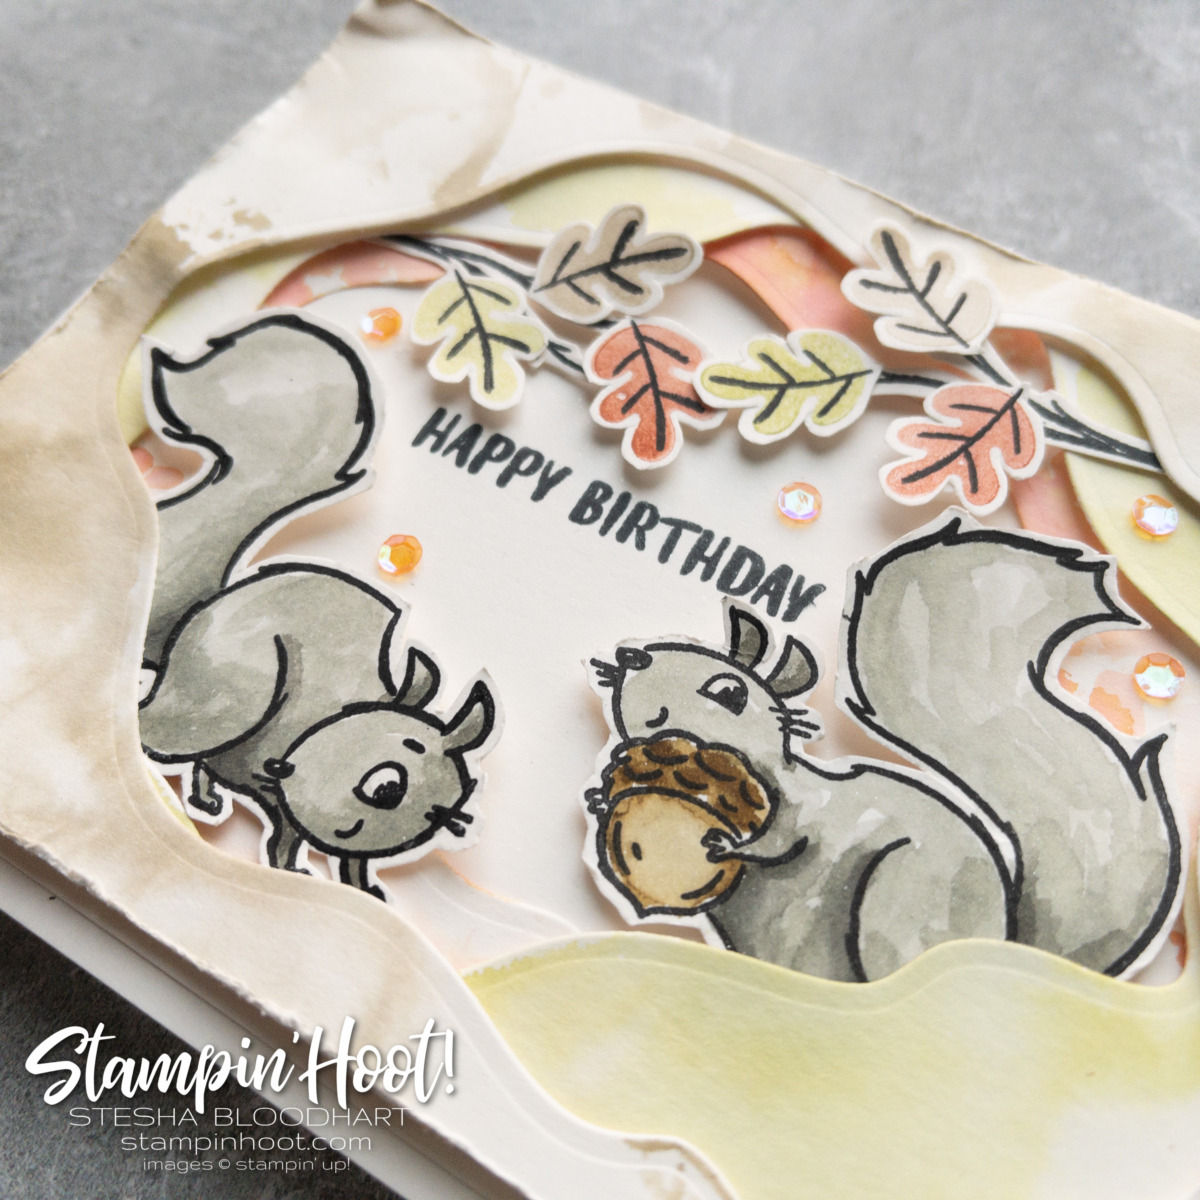 Create this Happy Birthday Card using the Nuts About Squirrels Stamp Set and Layering Diorama Dies. Stesha Bloodhart. Stampin' Hoot!